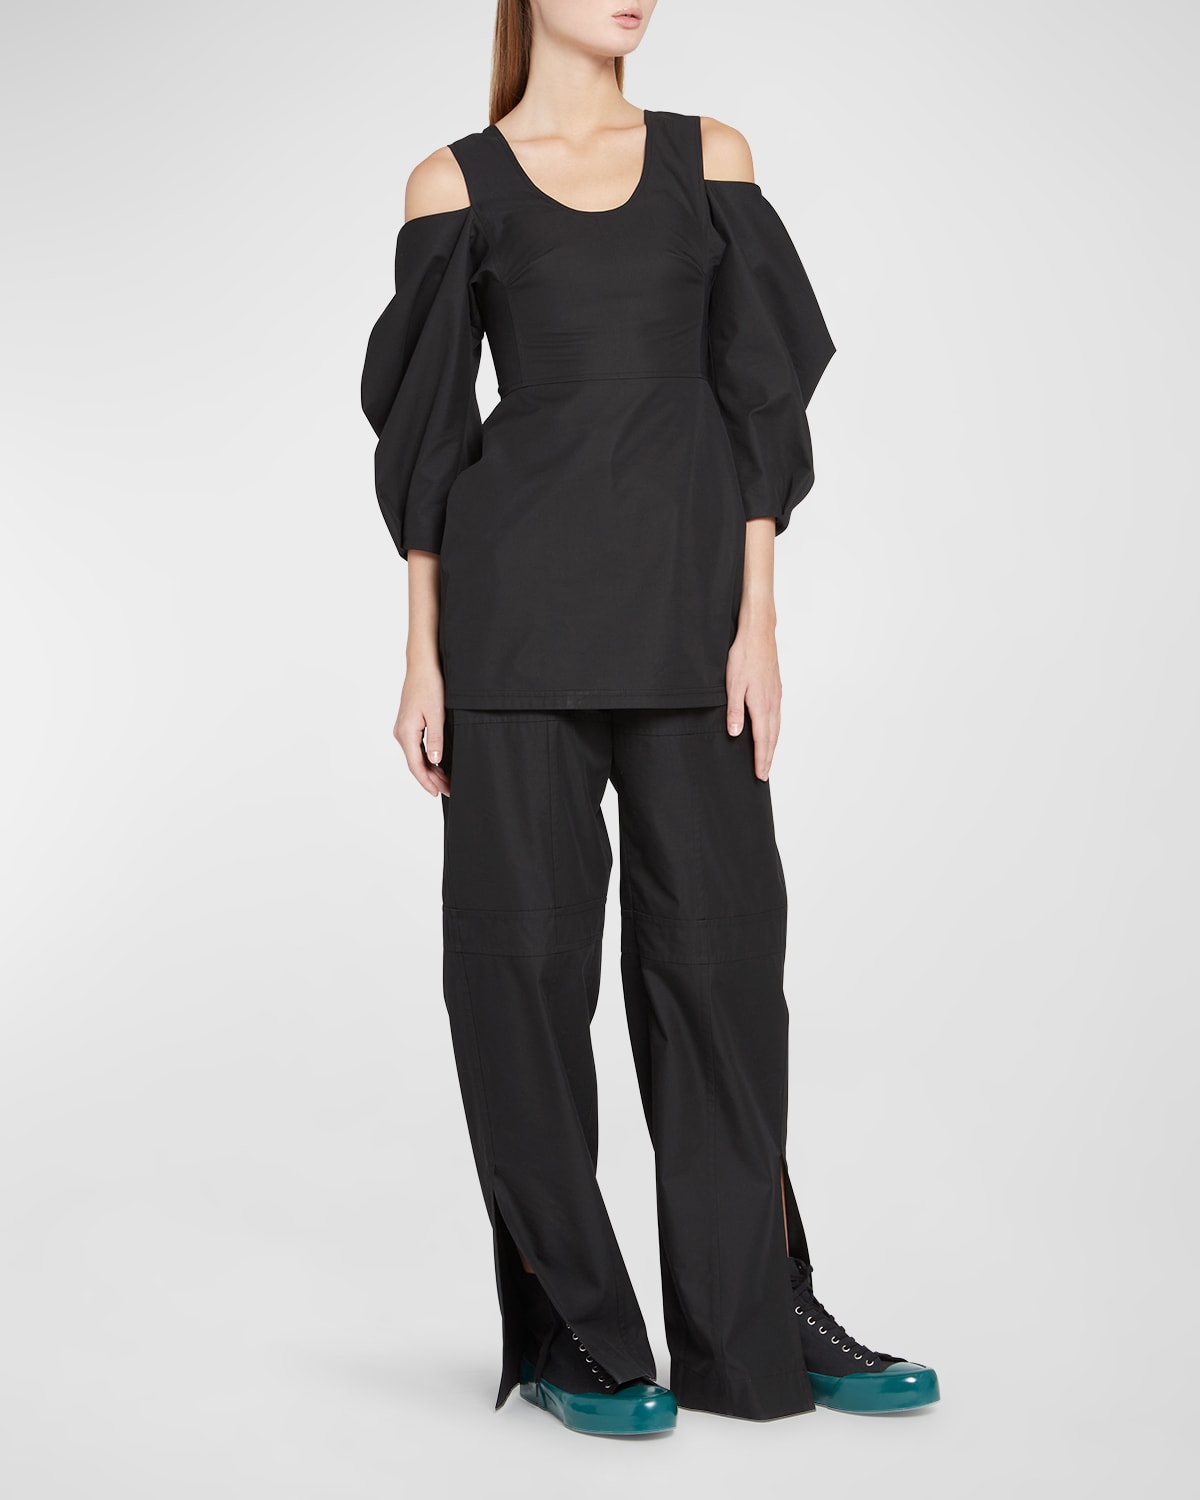 JIL SANDER GATHERED COLD-SHOULDER TOP WITH PUFF SLEEVES